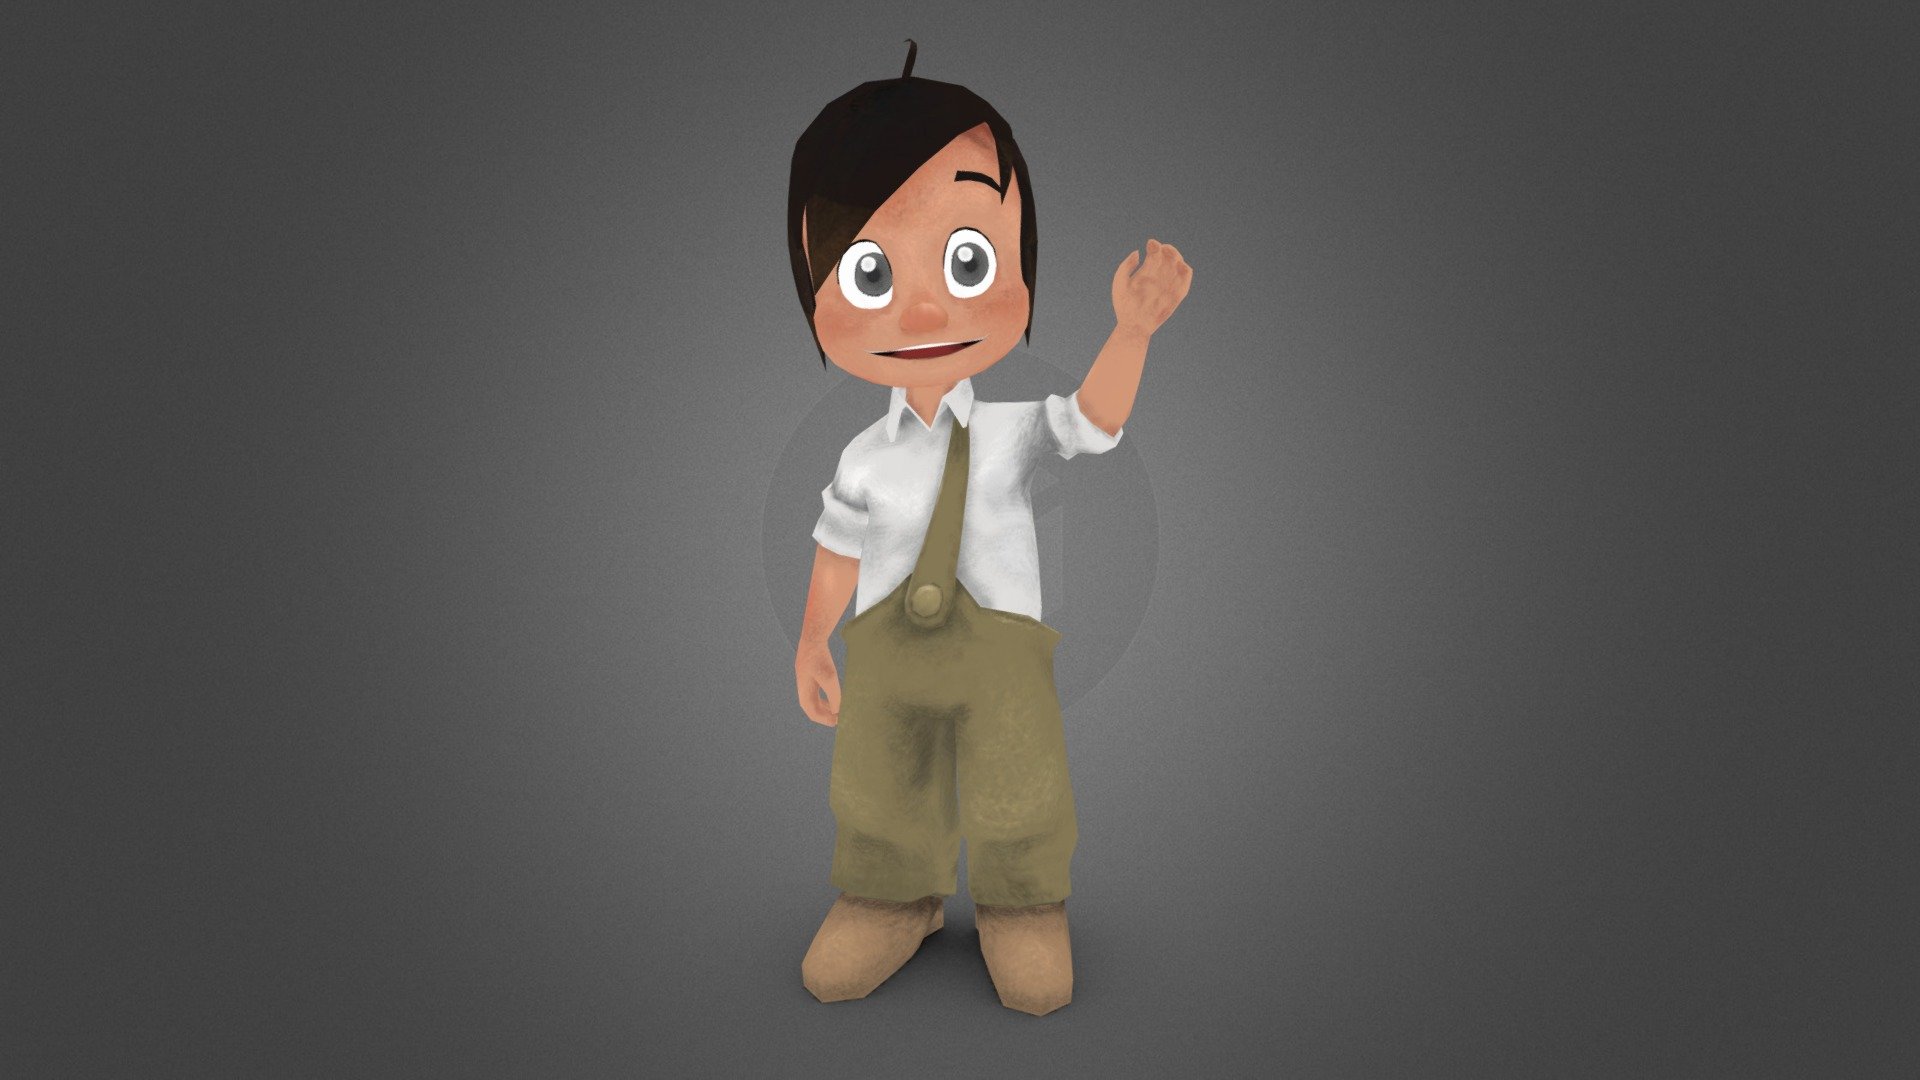 A Quick model of the character Marcelino, 
One 1k diffuse map 3d model